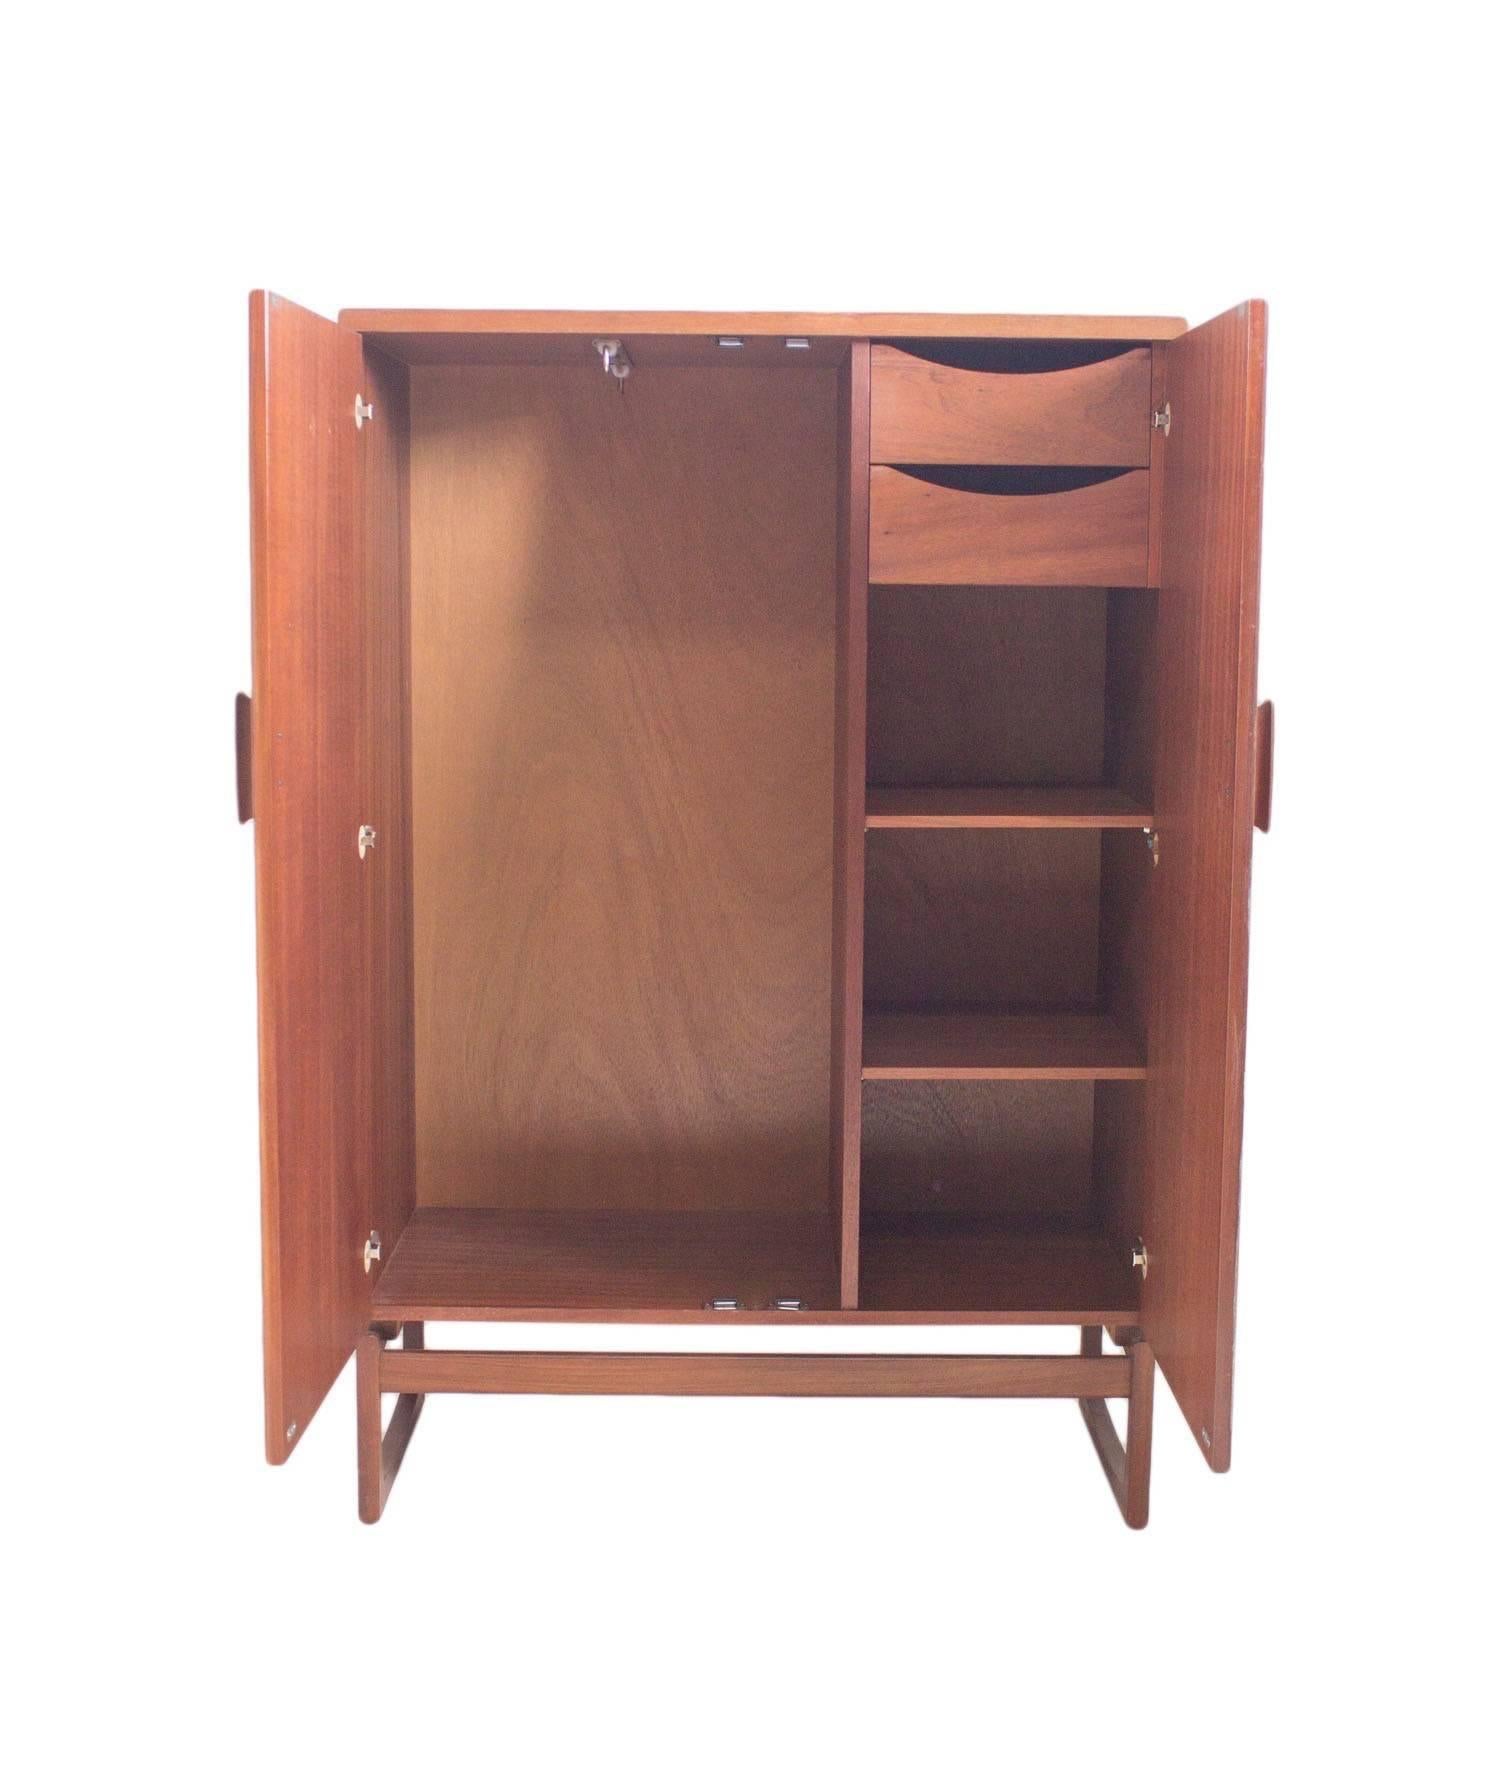 1965 could be argued as one of the best years for G Plan design with R Bennett creating the stunning Quadrille range of furniture in luxurious teak with beautiful rosewood handles.

This extremely rare and highly sought after Tallboy Wardrobe unit